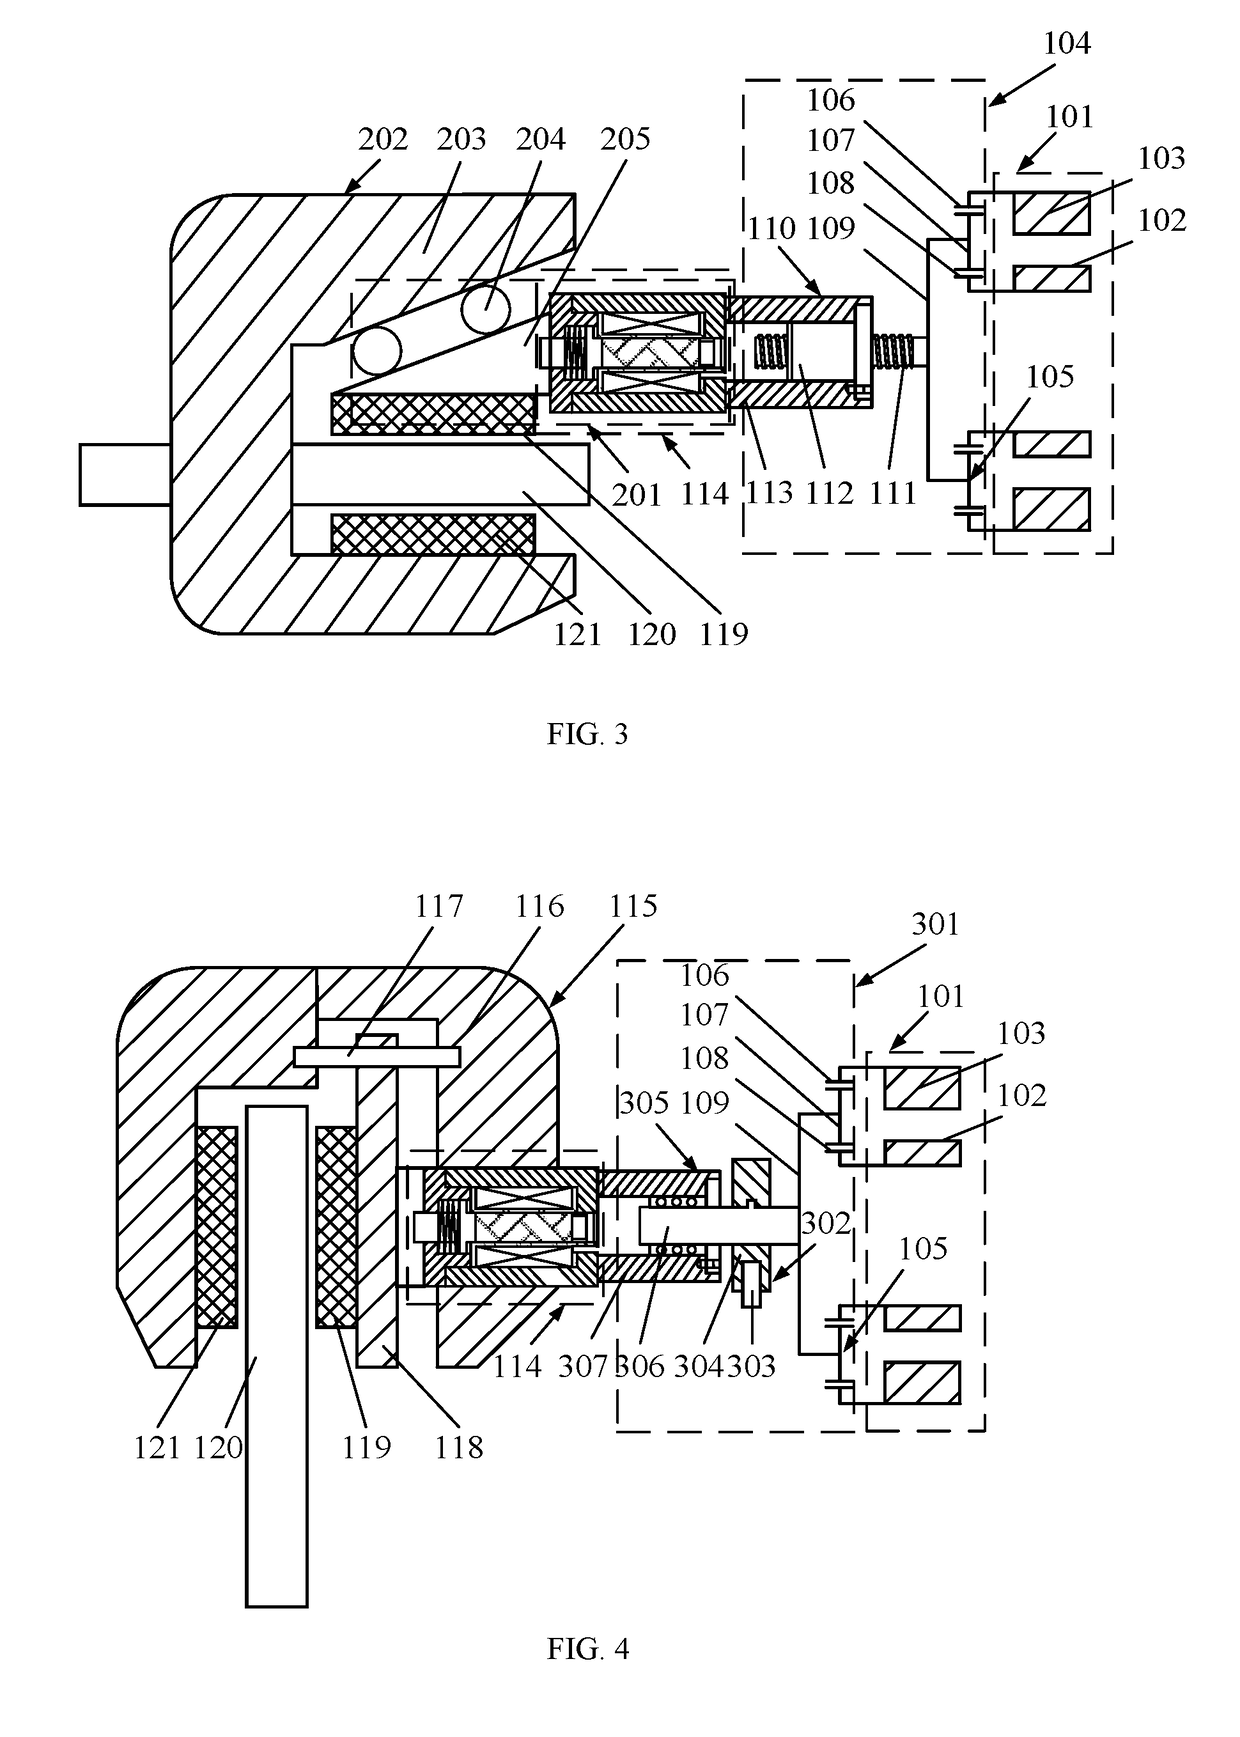 Hybrid brake-by-wire system using a motor-magnetostrictive actuator combination